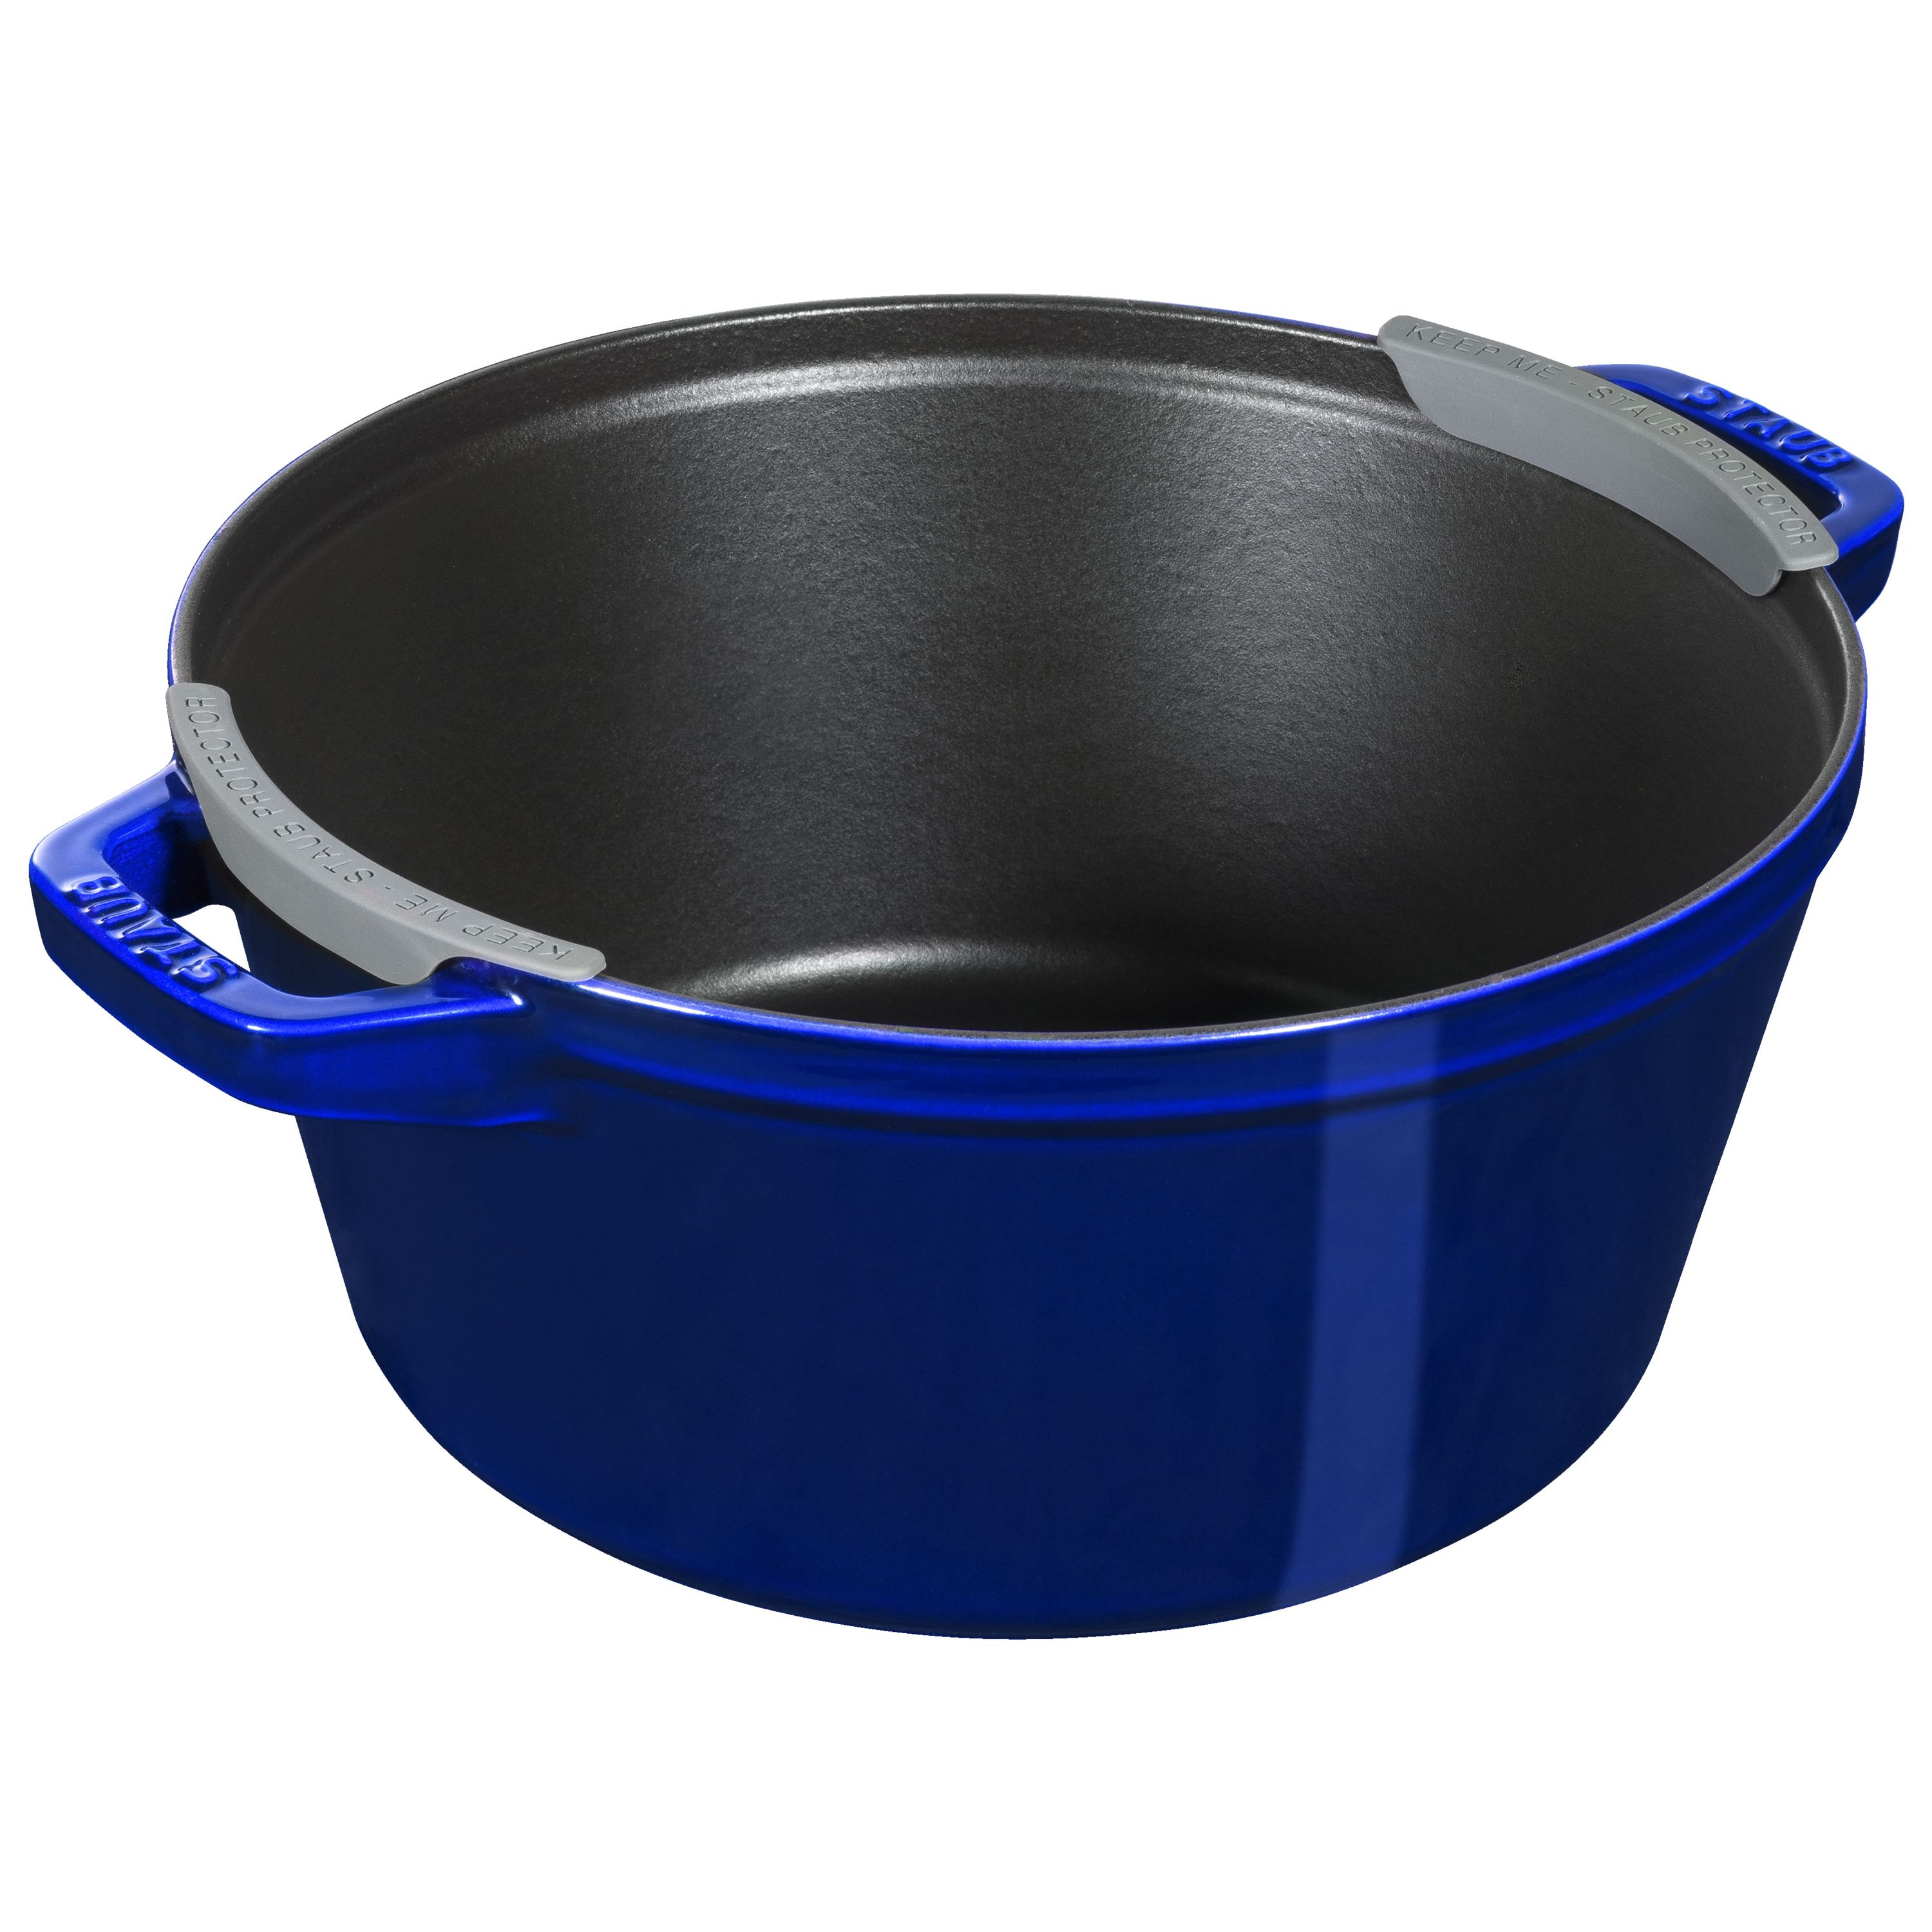 PC Enameled Cast Iron Grill Pan